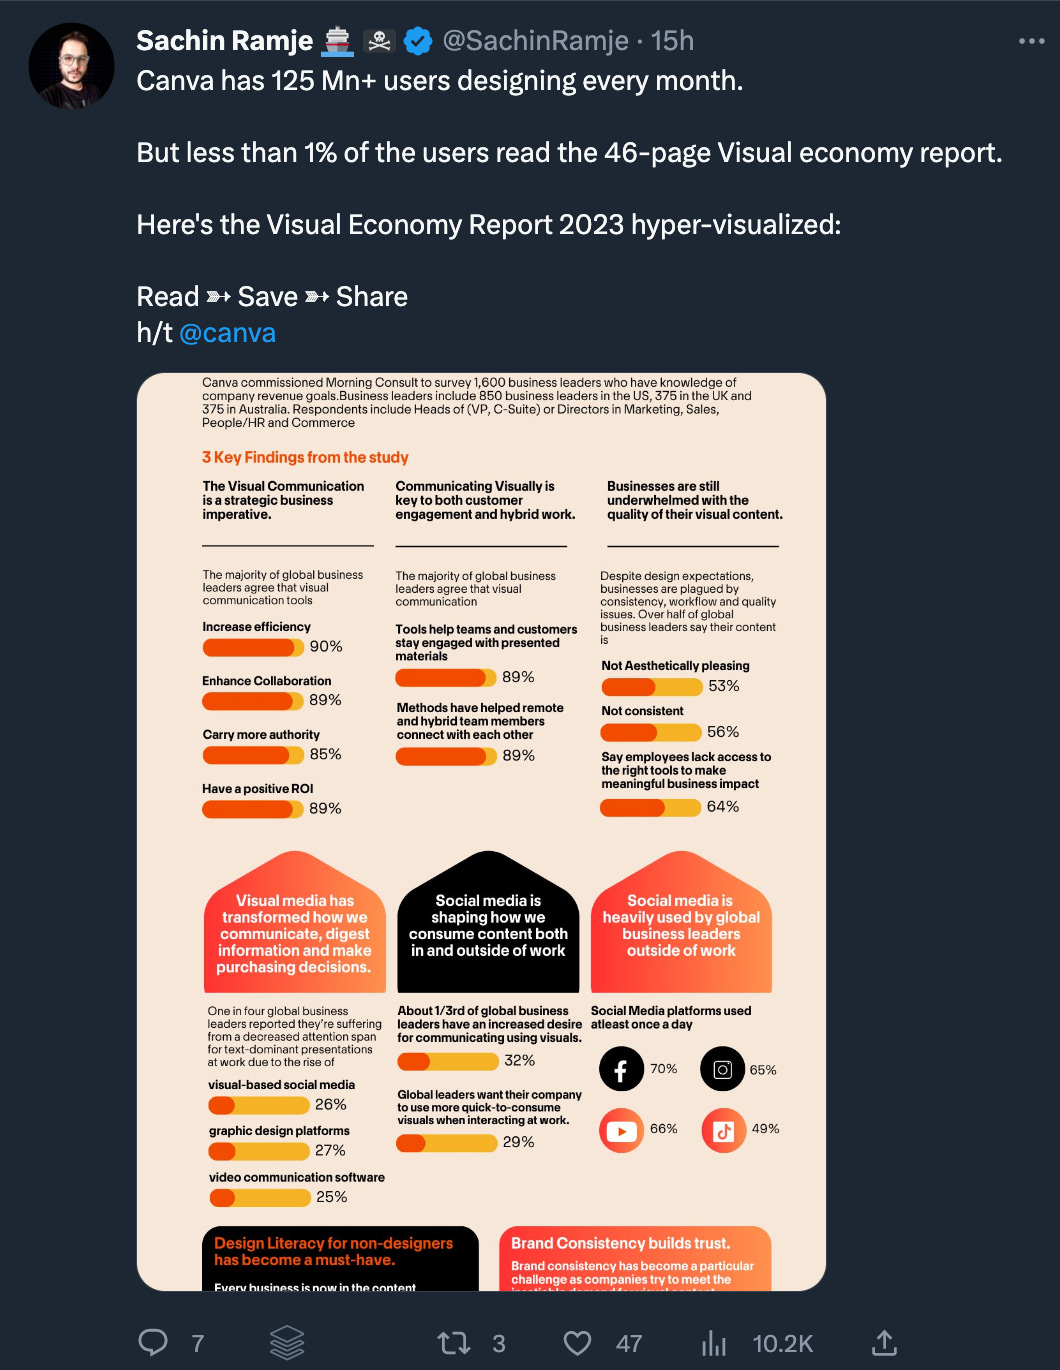 Sachin Ramje tweet, first in a thread, about the Canva Visual Economy Report